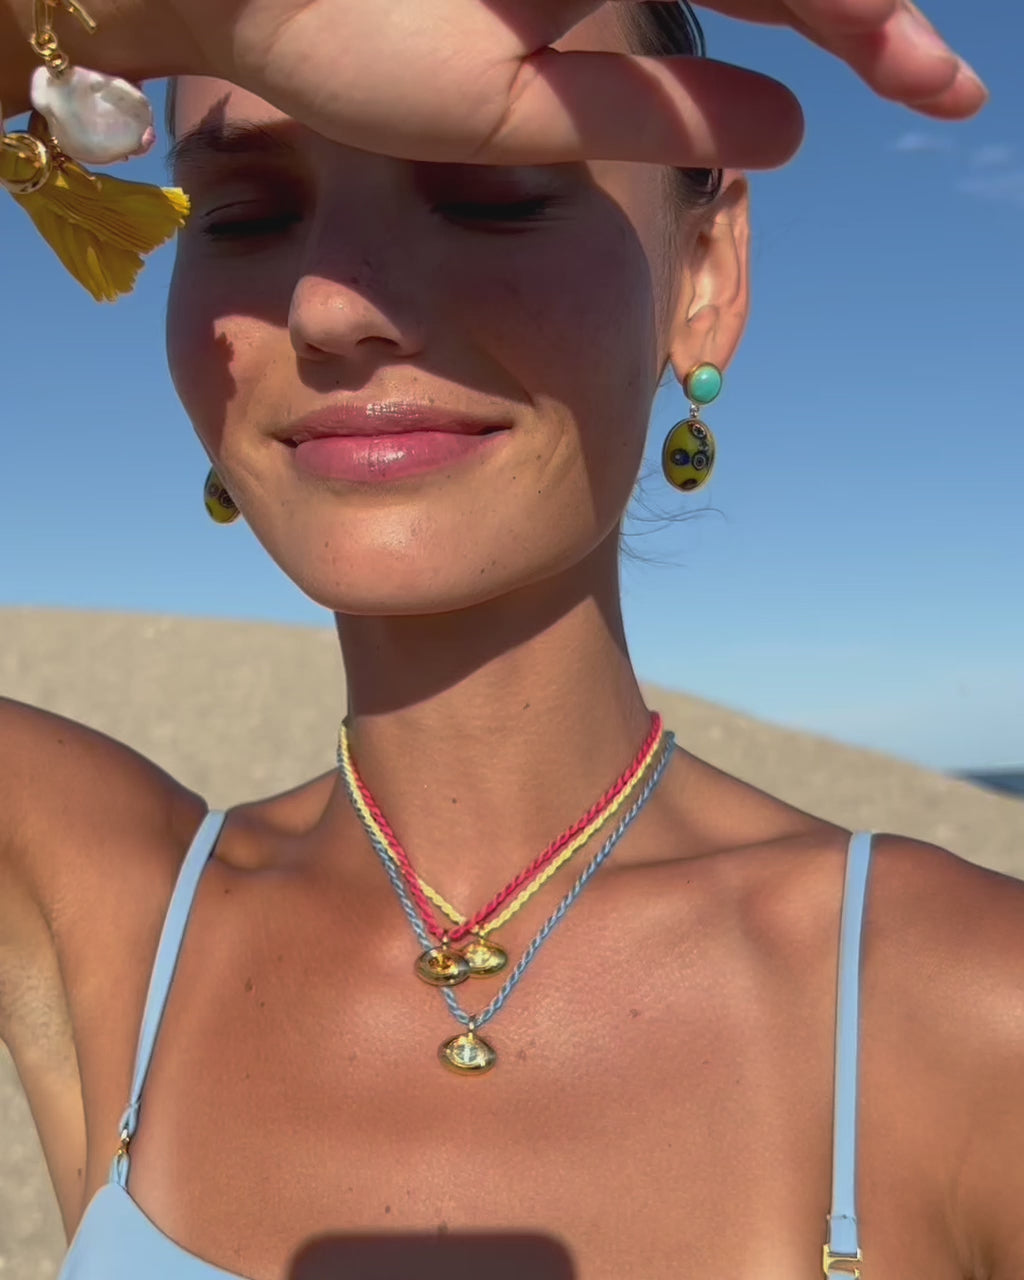 Video of model at beach wearing the Best Friend Necklaces with the Murano Muse Earrings and Shibori Ribbon Bracelets.